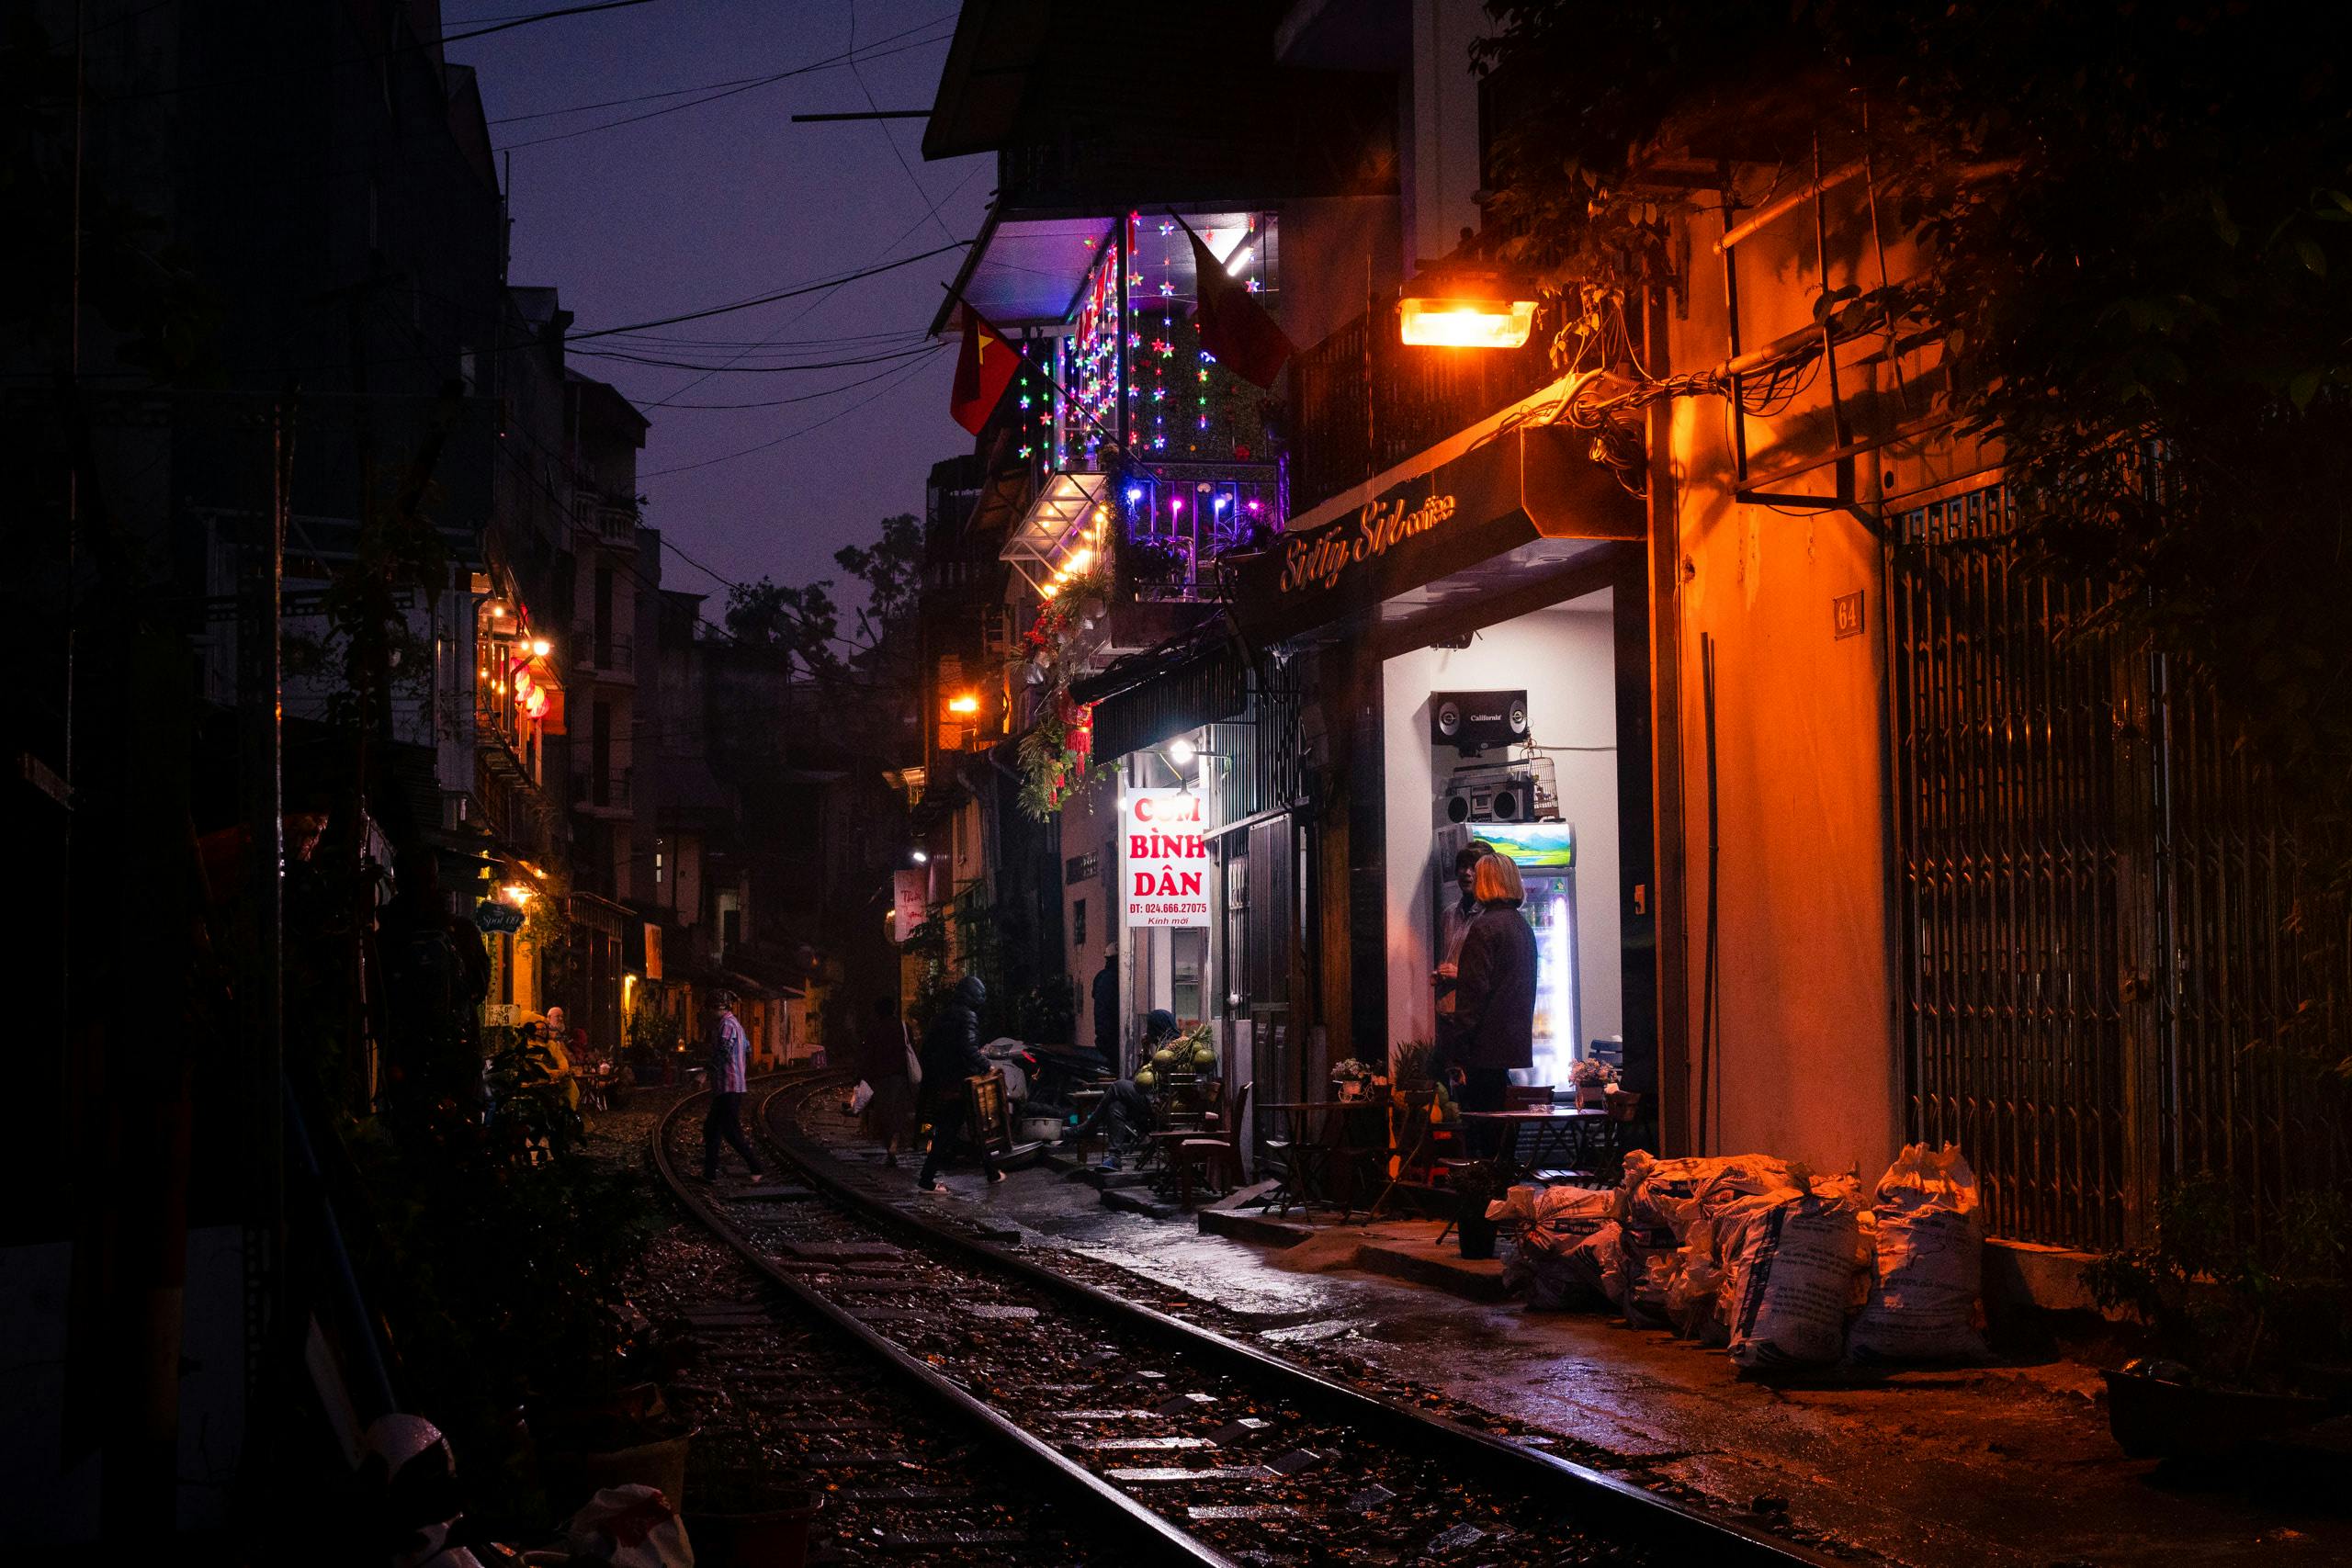 Stores running along an active train track in the evening